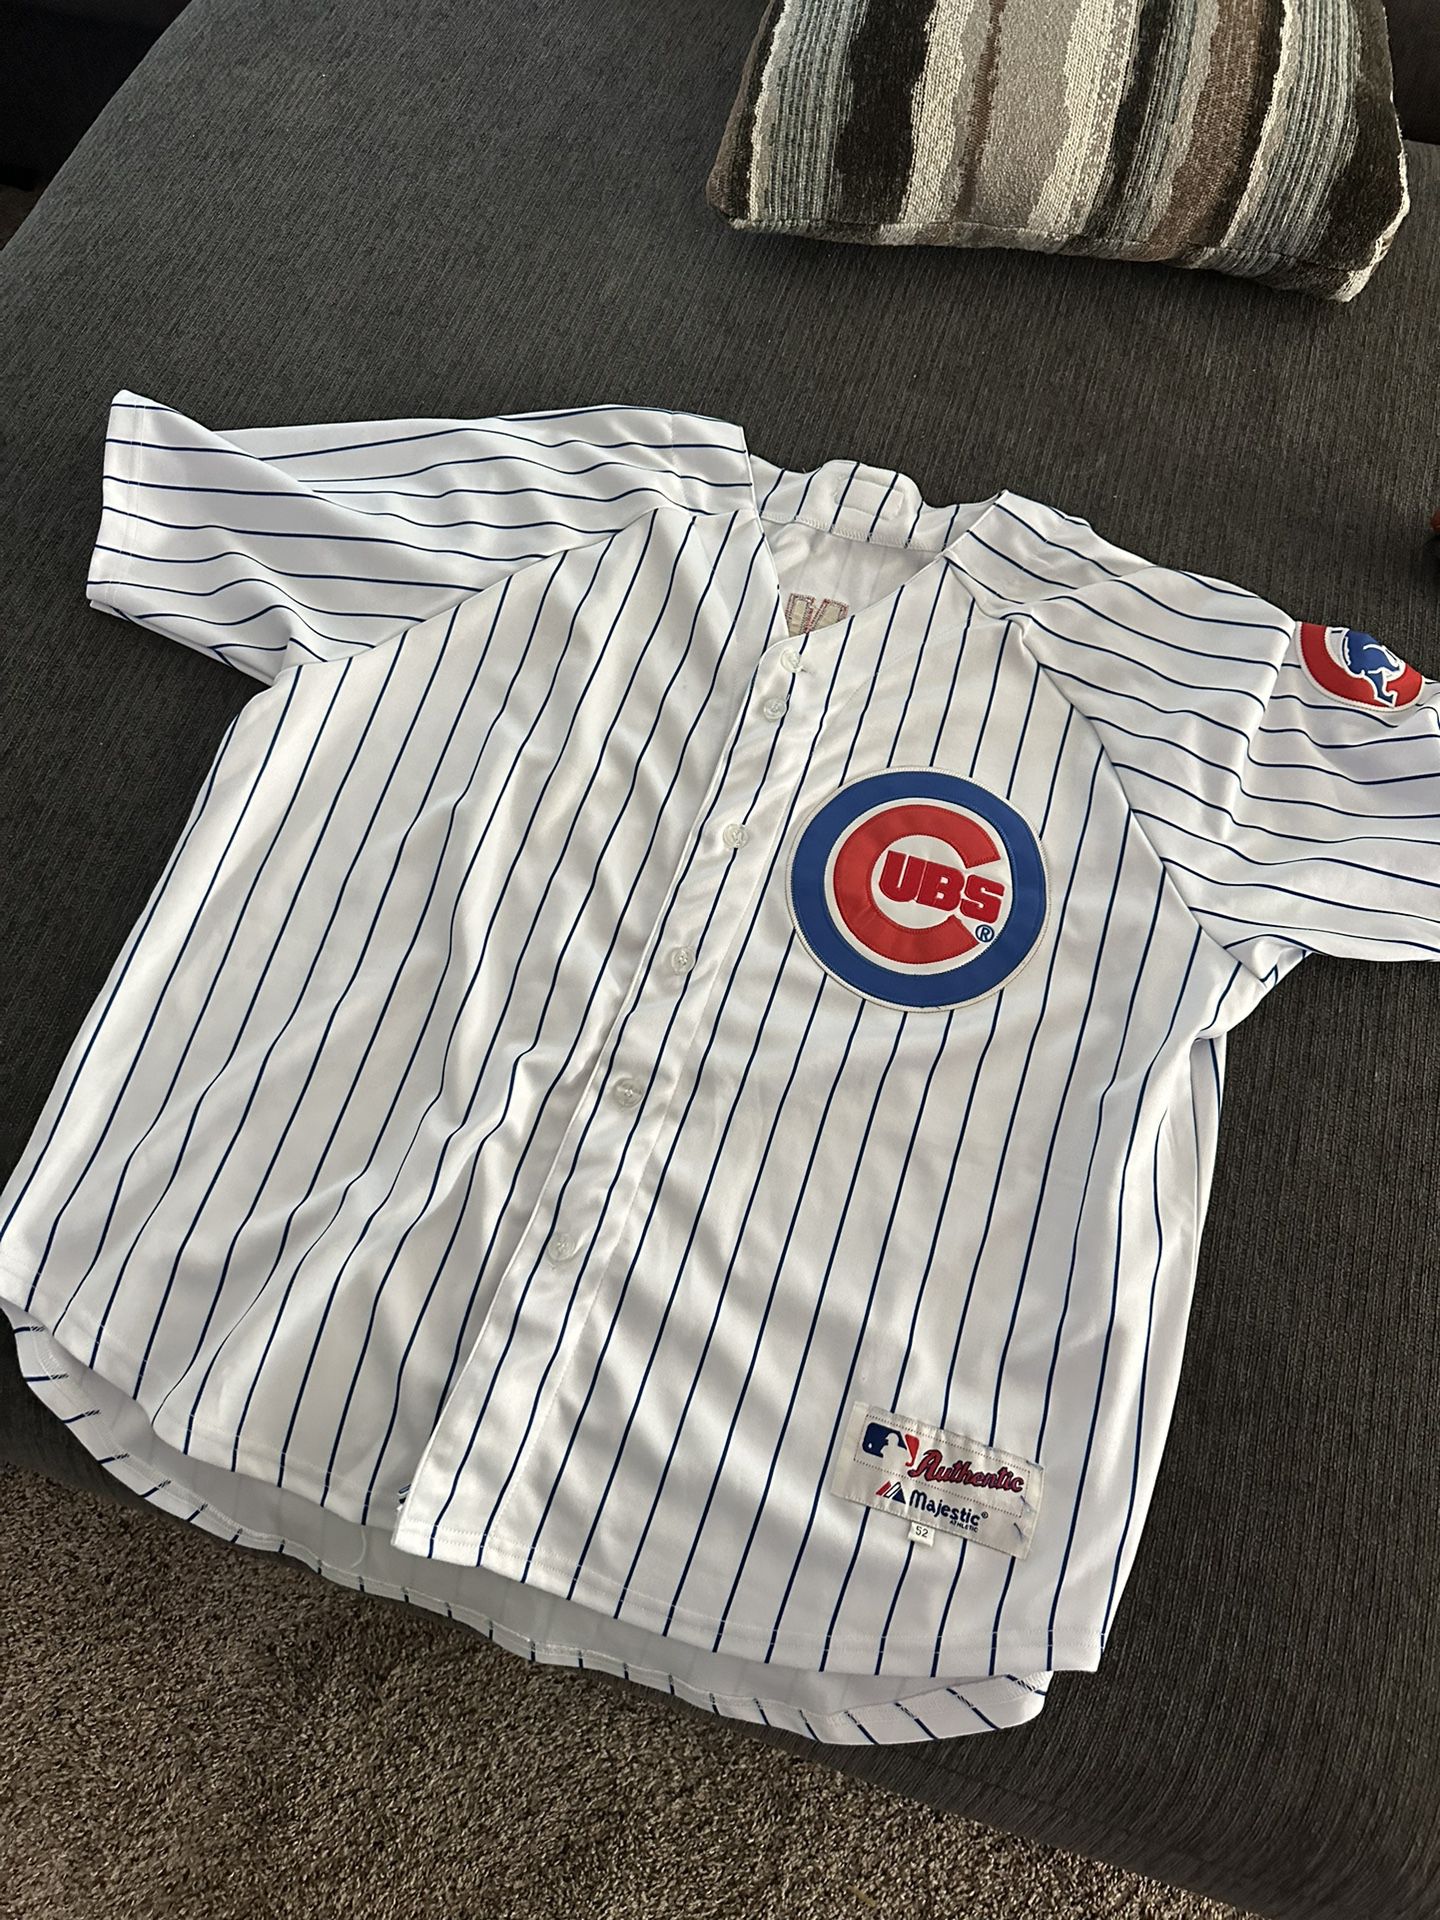 cubs jersey authentic